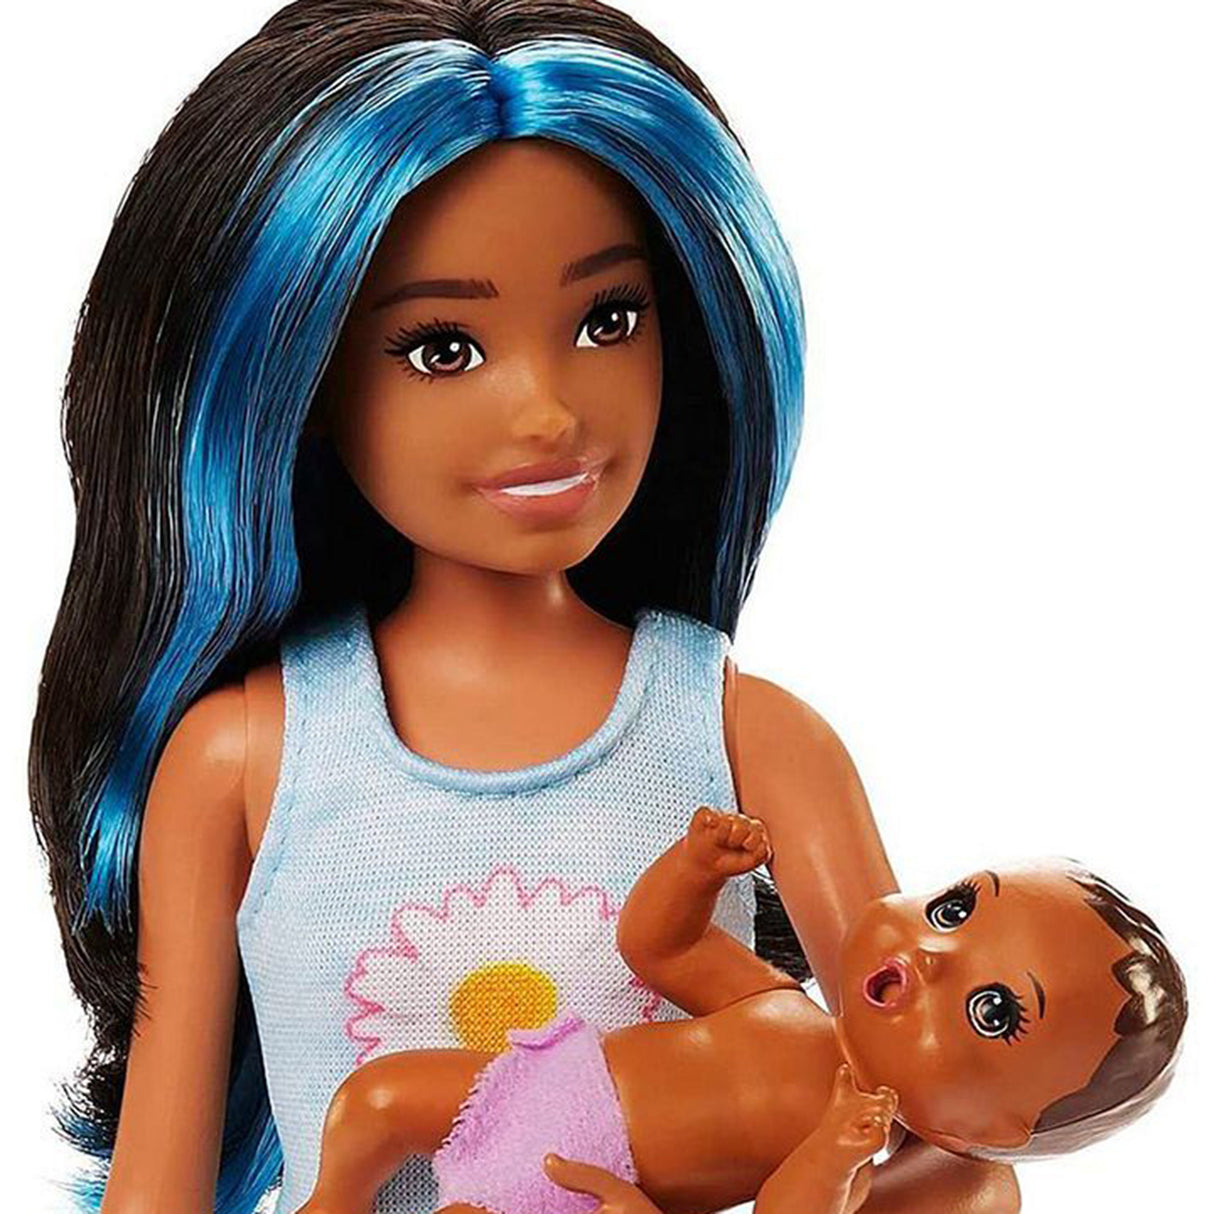 Barbie Skipper Babysitters Inc Dolls and Putting baby to Sleep